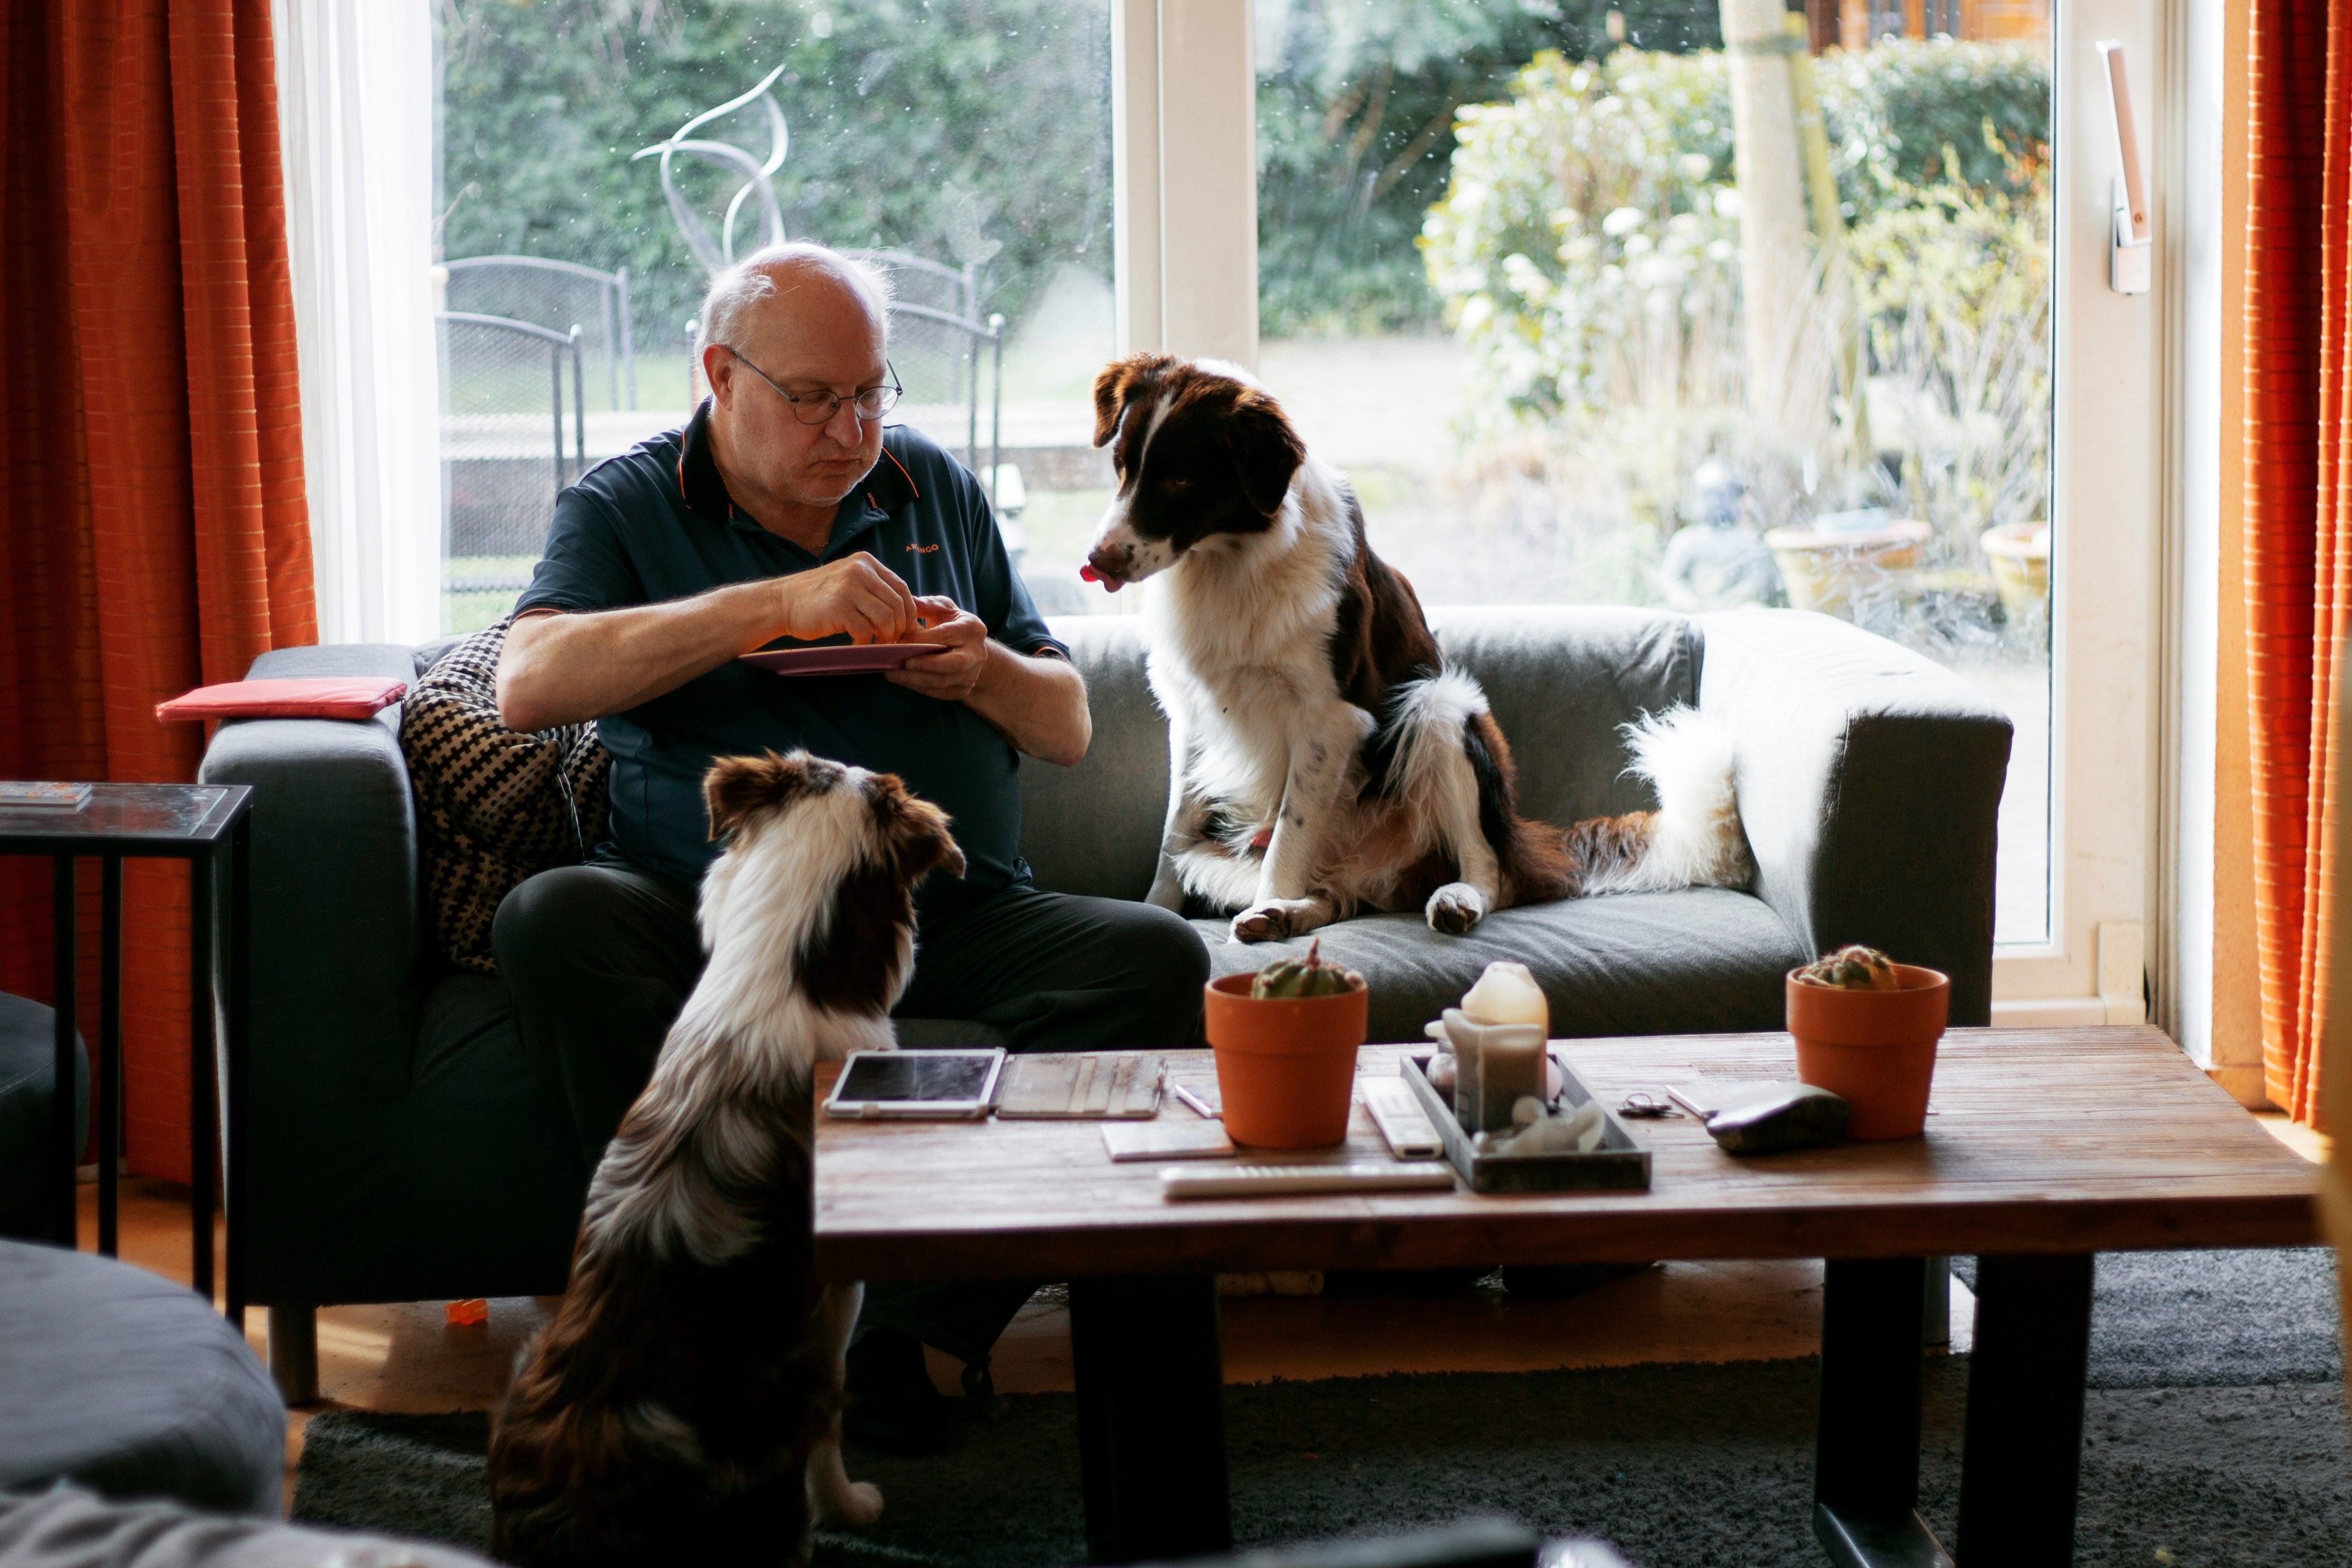 Elderly man sitting on a couch in the living room feeding his dog.